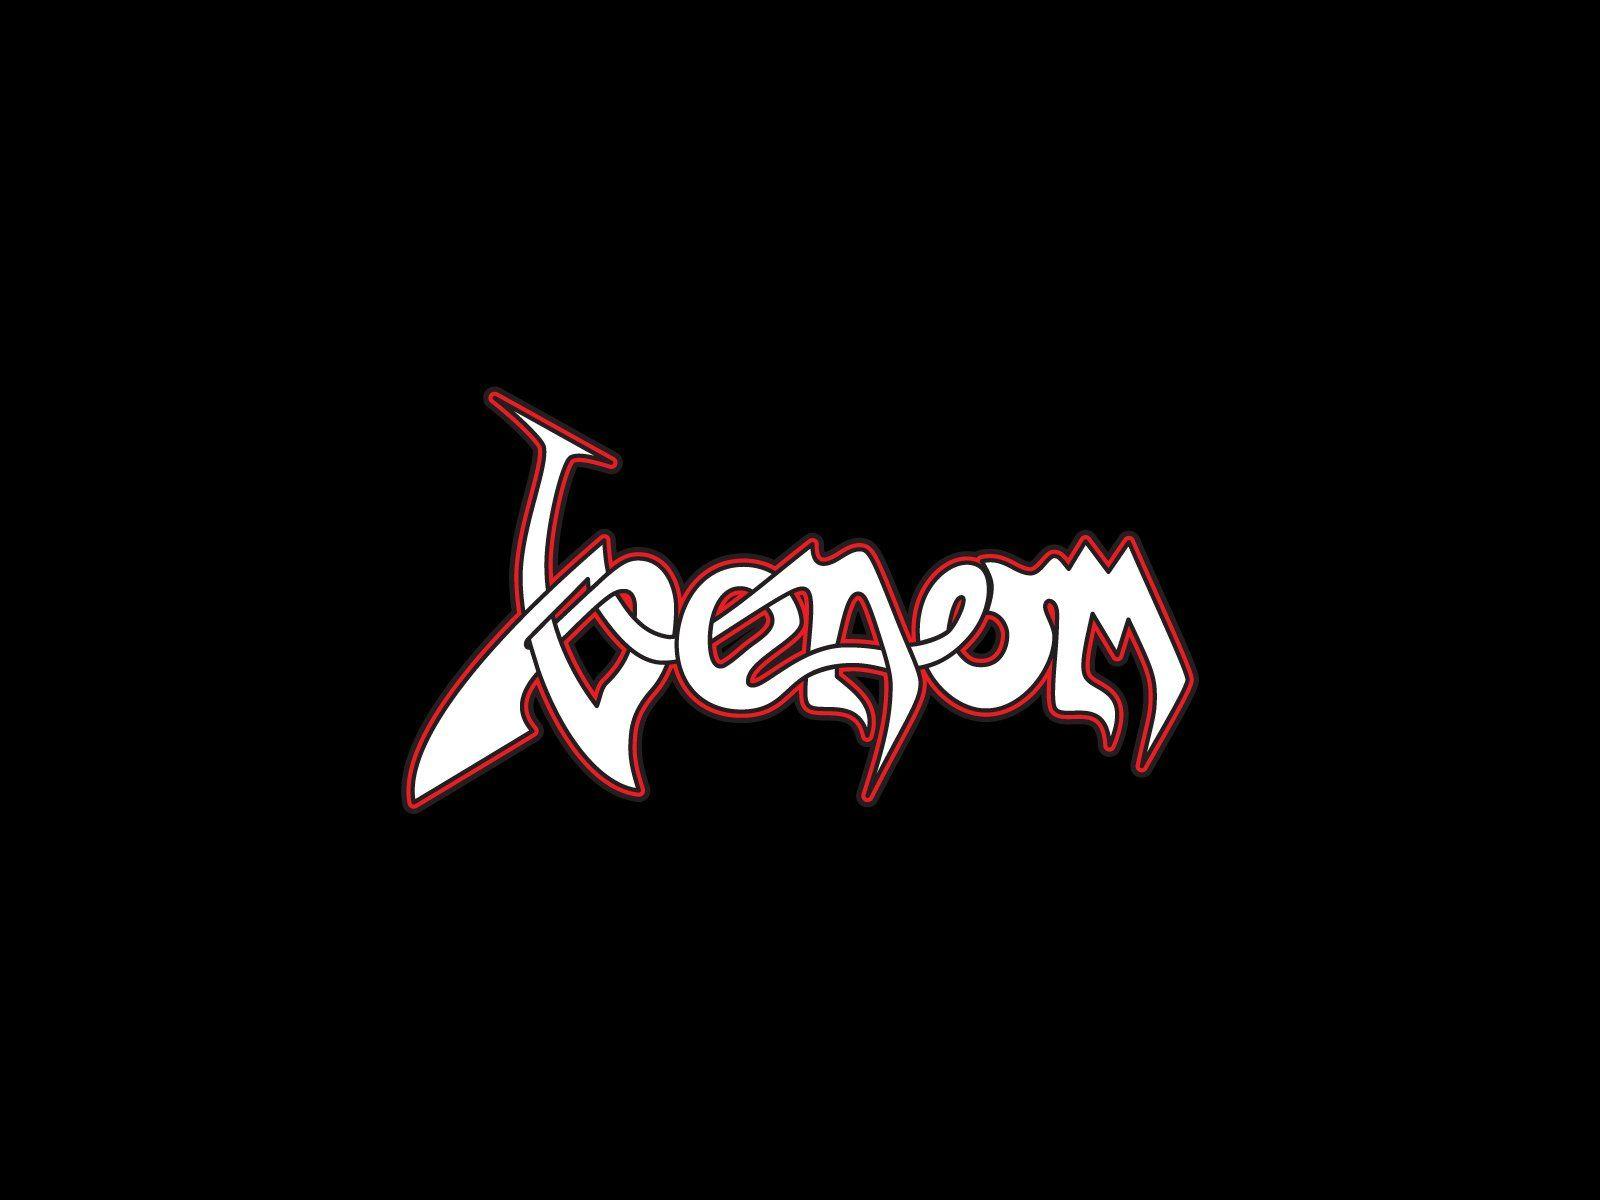 Venom Band Wallpapers Top Free Venom Band Backgrounds Wallpaperaccess